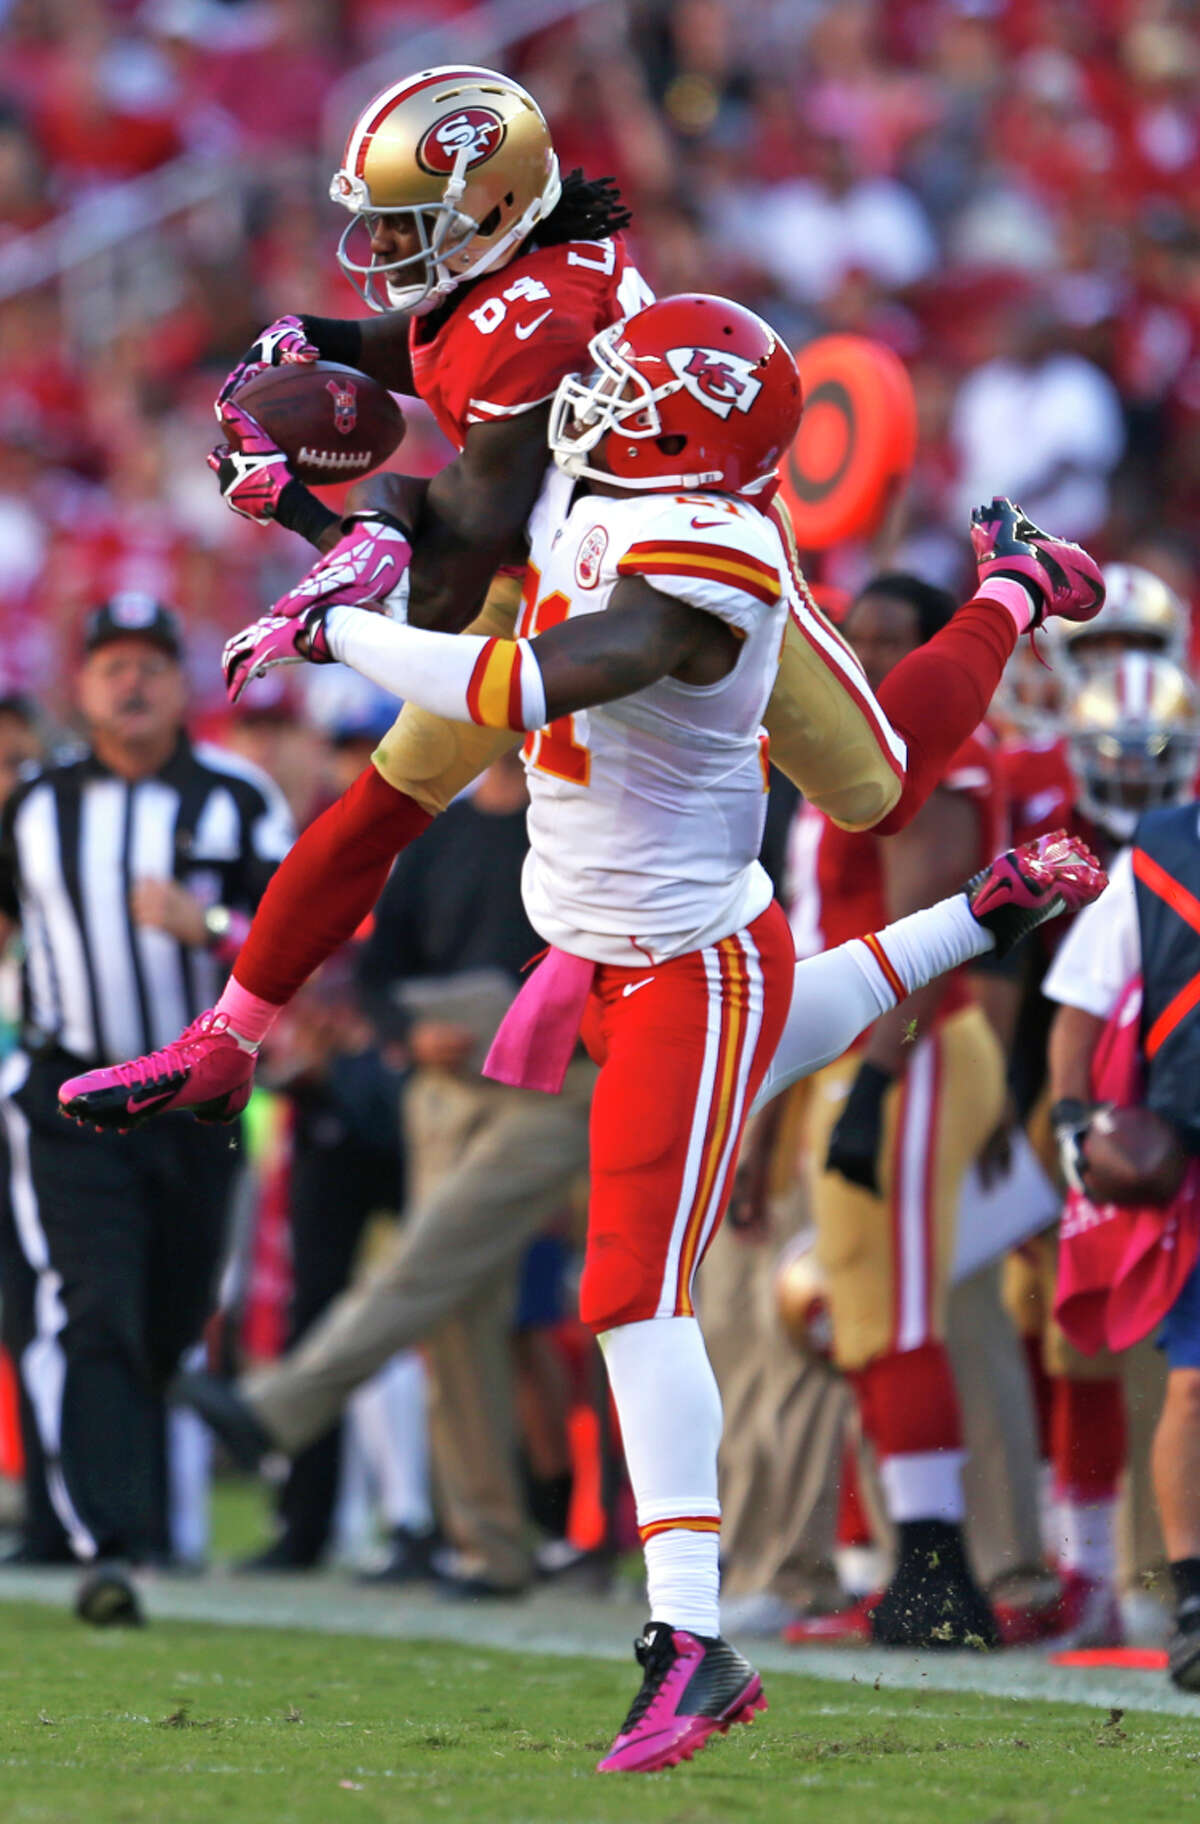 The 49ers' Brandon Lloyd makes a fourth-quarter reception in front of the Chiefs' Sean Smith.